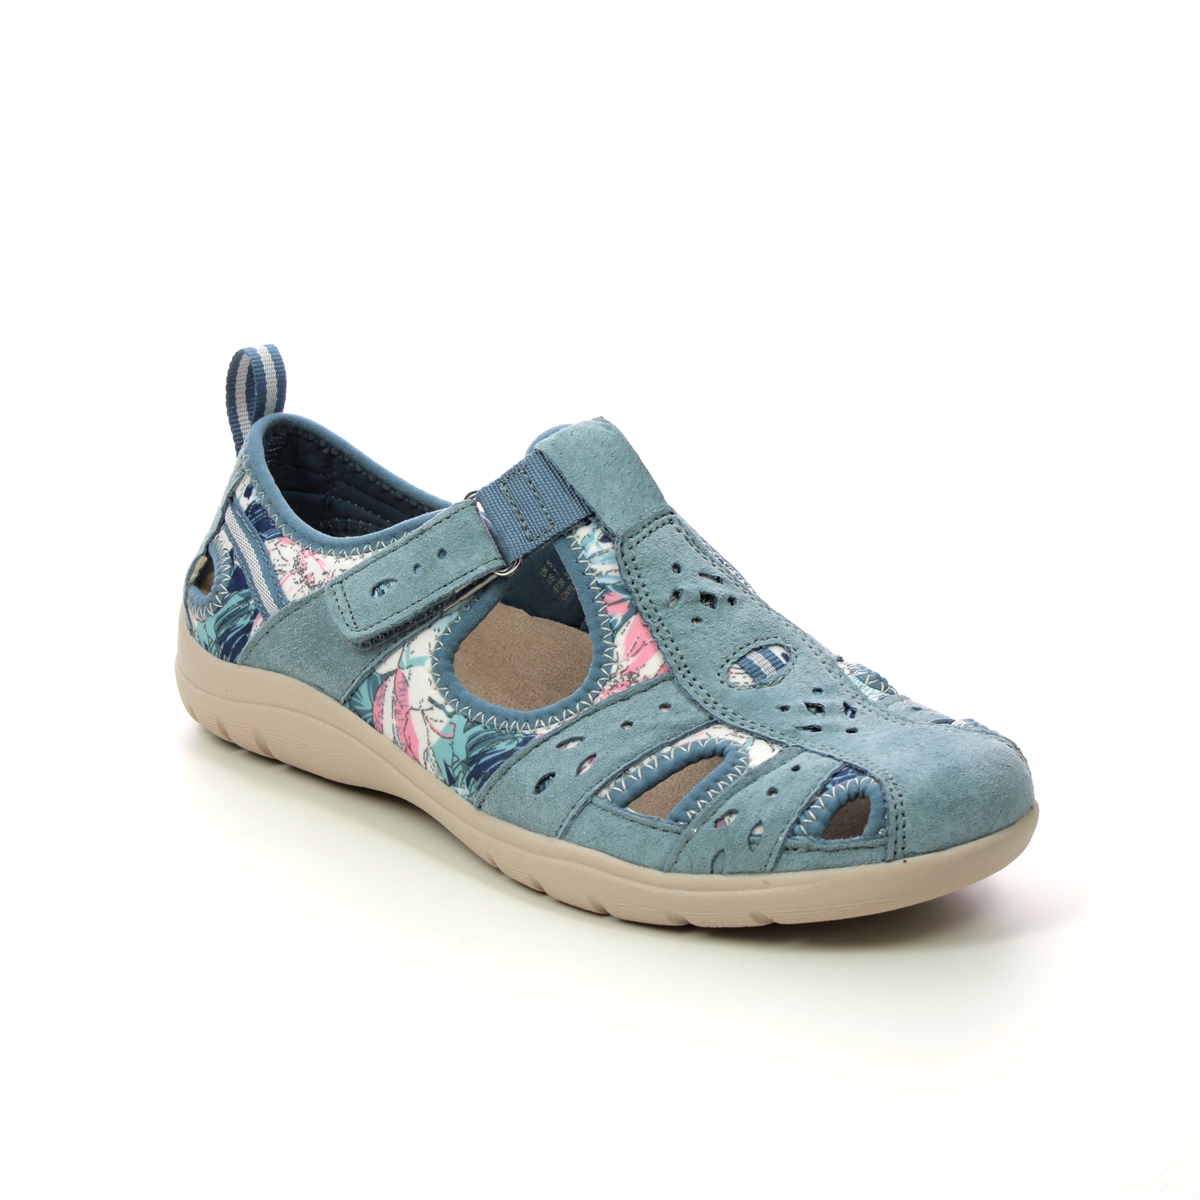 Earth Spirit Cleveland 01 Blue Womens Closed Toe Sandals 40703-75 in a Plain Leather and Textile in Size 3